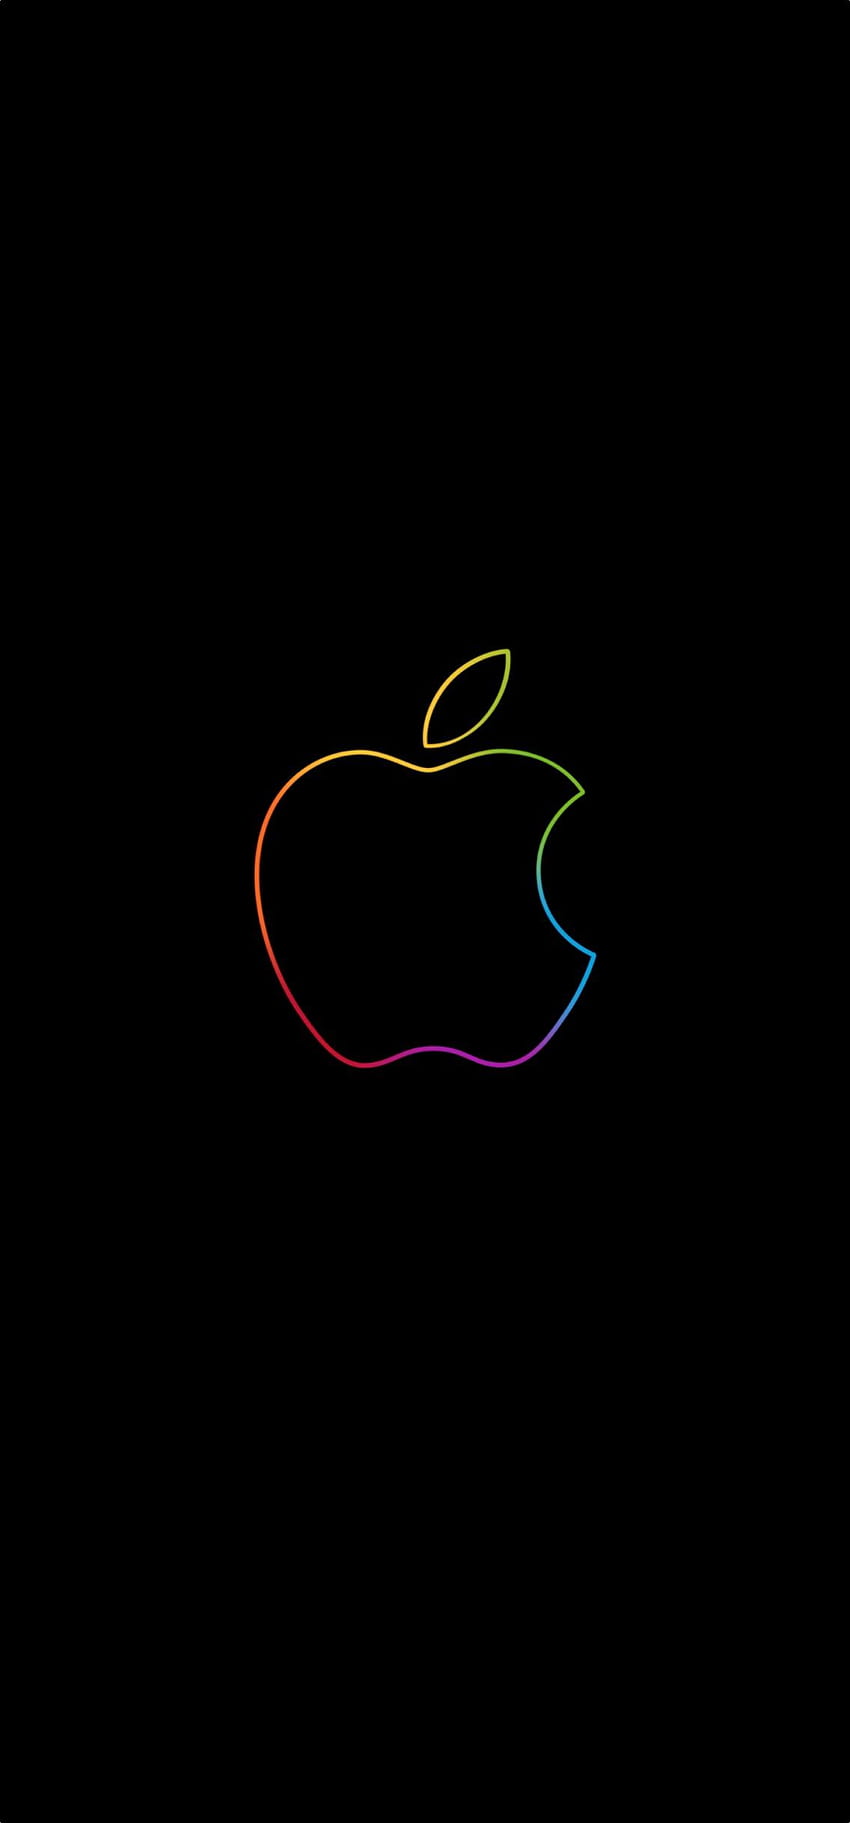 Apple Store Featuring The Colorful Apple, apple logo iphone HD phone ...